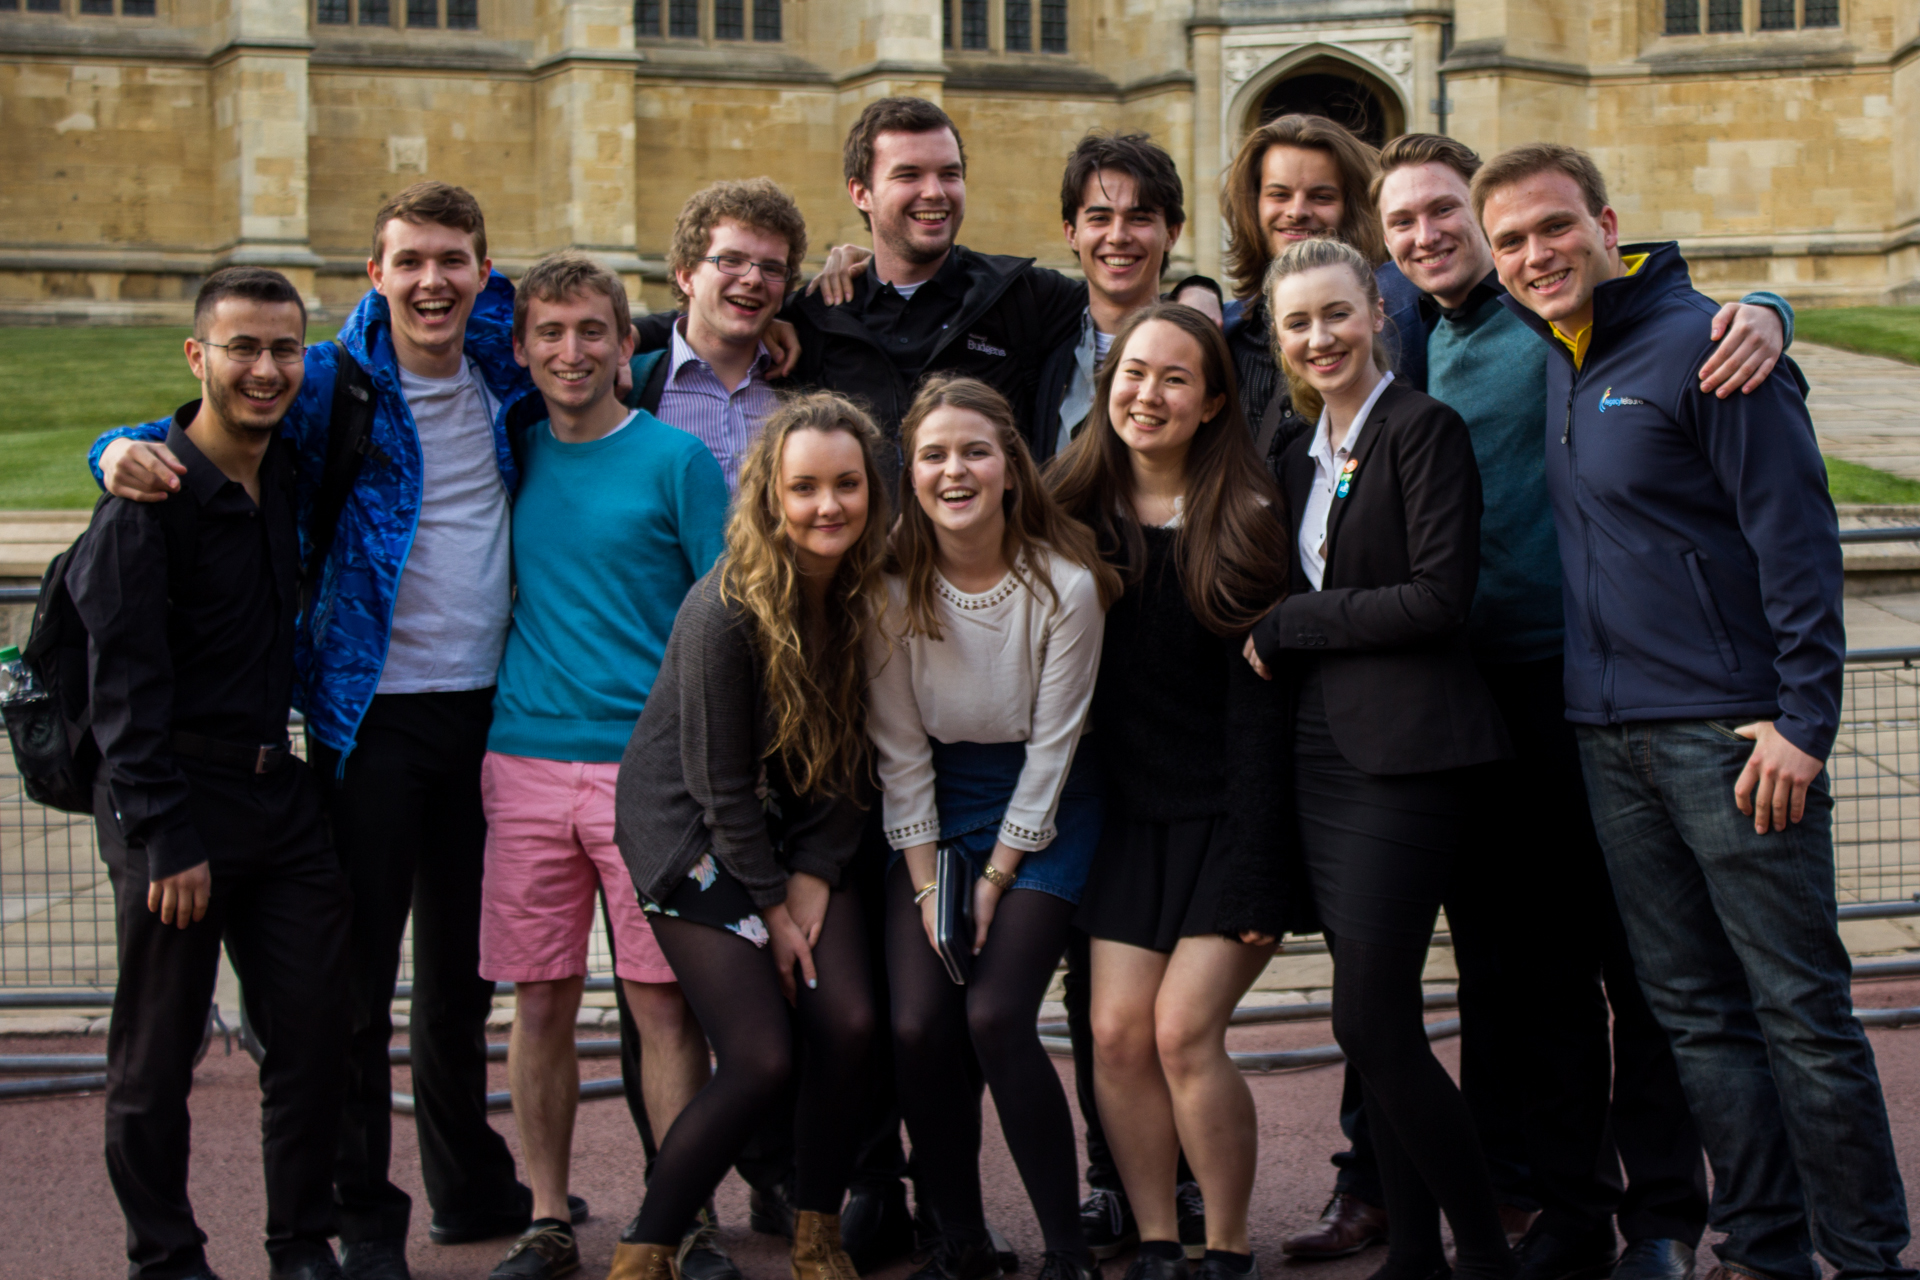 The 'Duo Crewo': some of Taplow Youth Choir's leavers, whose notorious late-night antics at Hotel Duo developed a strong sense of friendship.